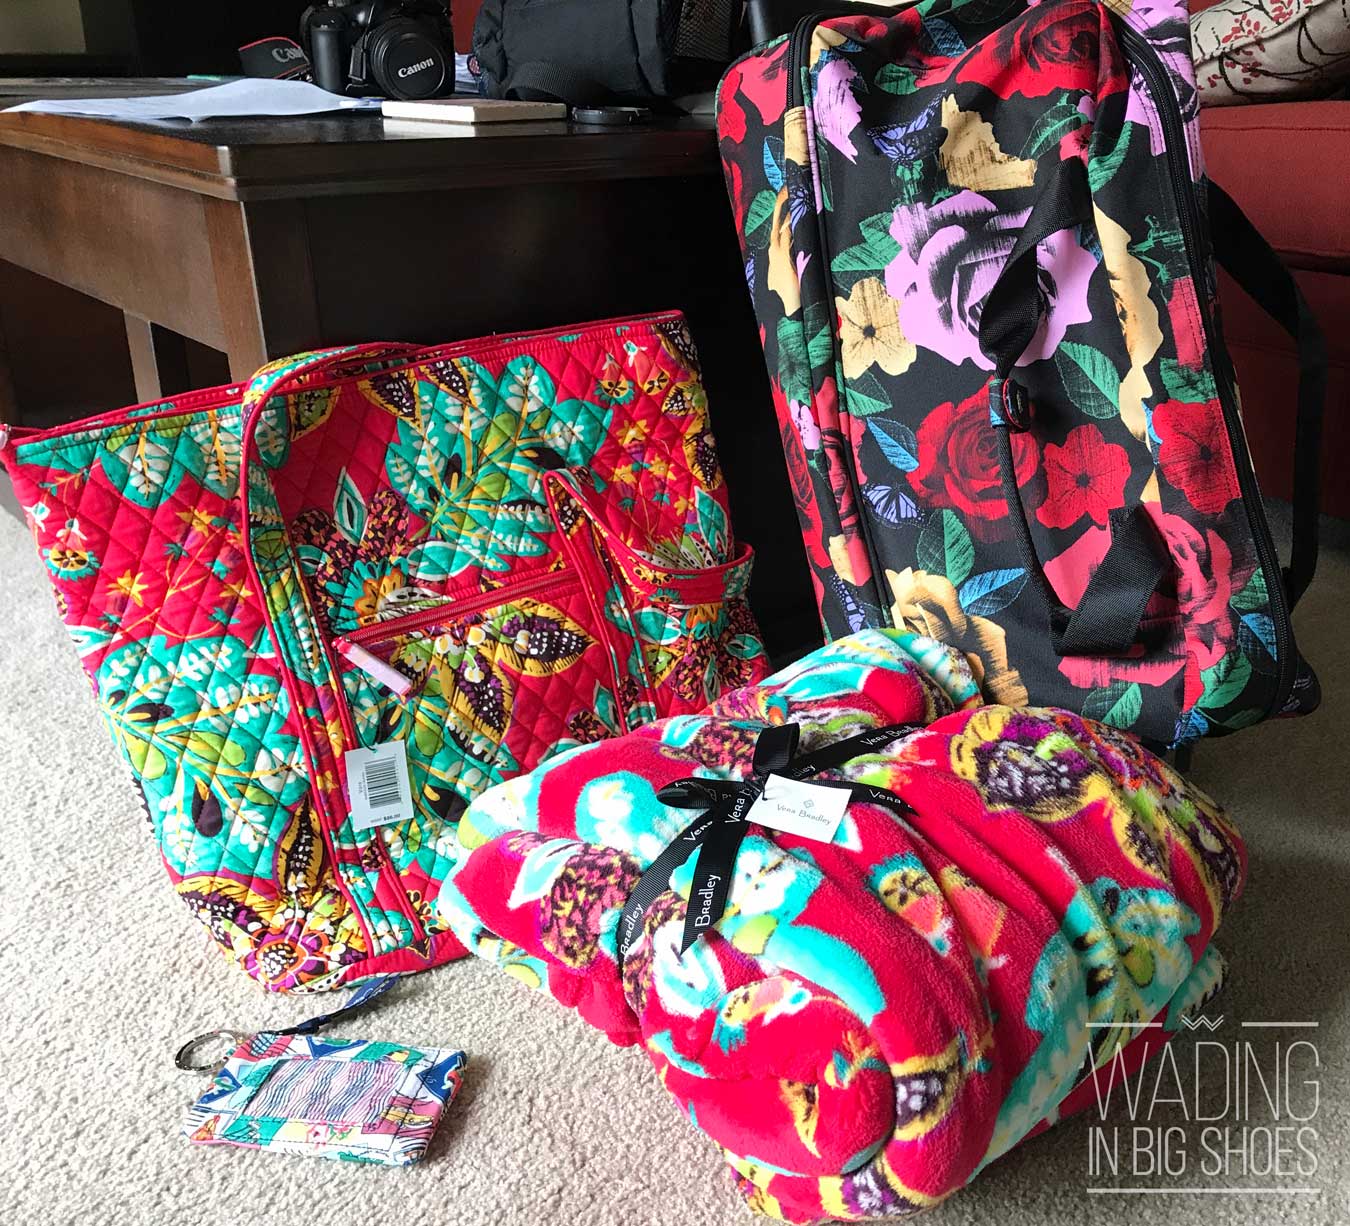 Vera Bradley - It's day one at the Annual Outlet Sale! An